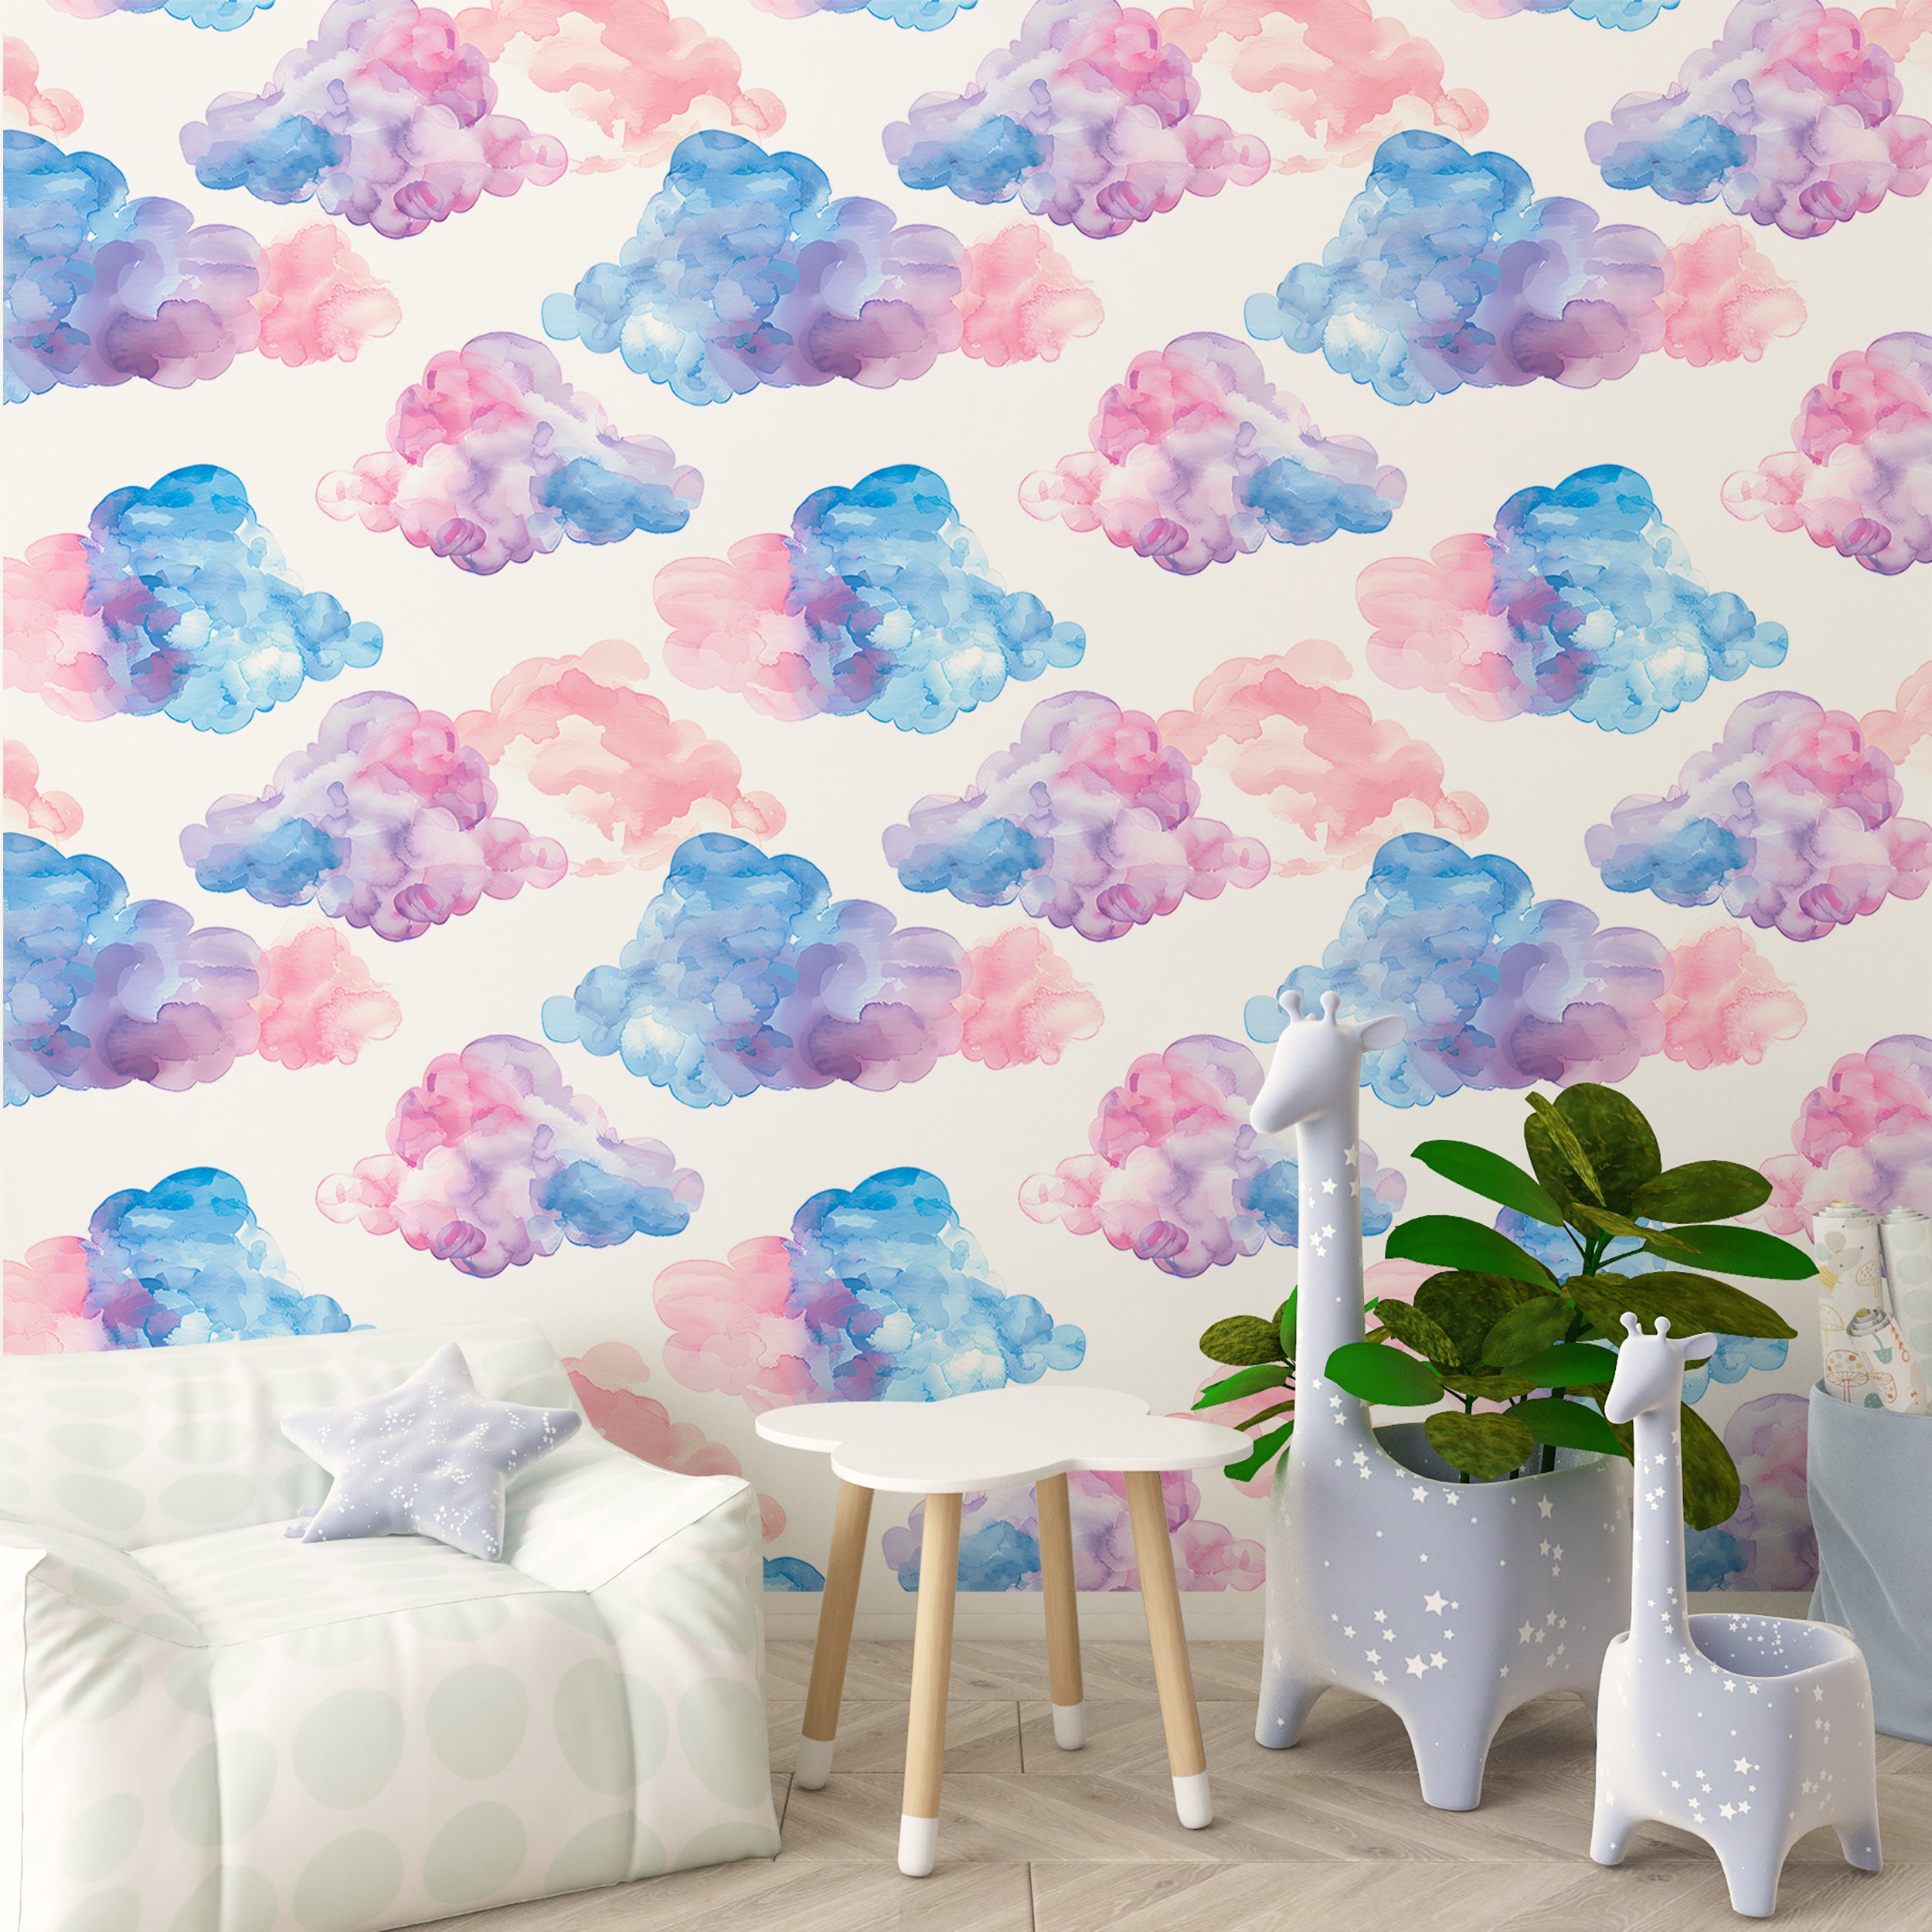 Soft pink and blue clouds wallpaper Nursery pastel colors clouds wall decor